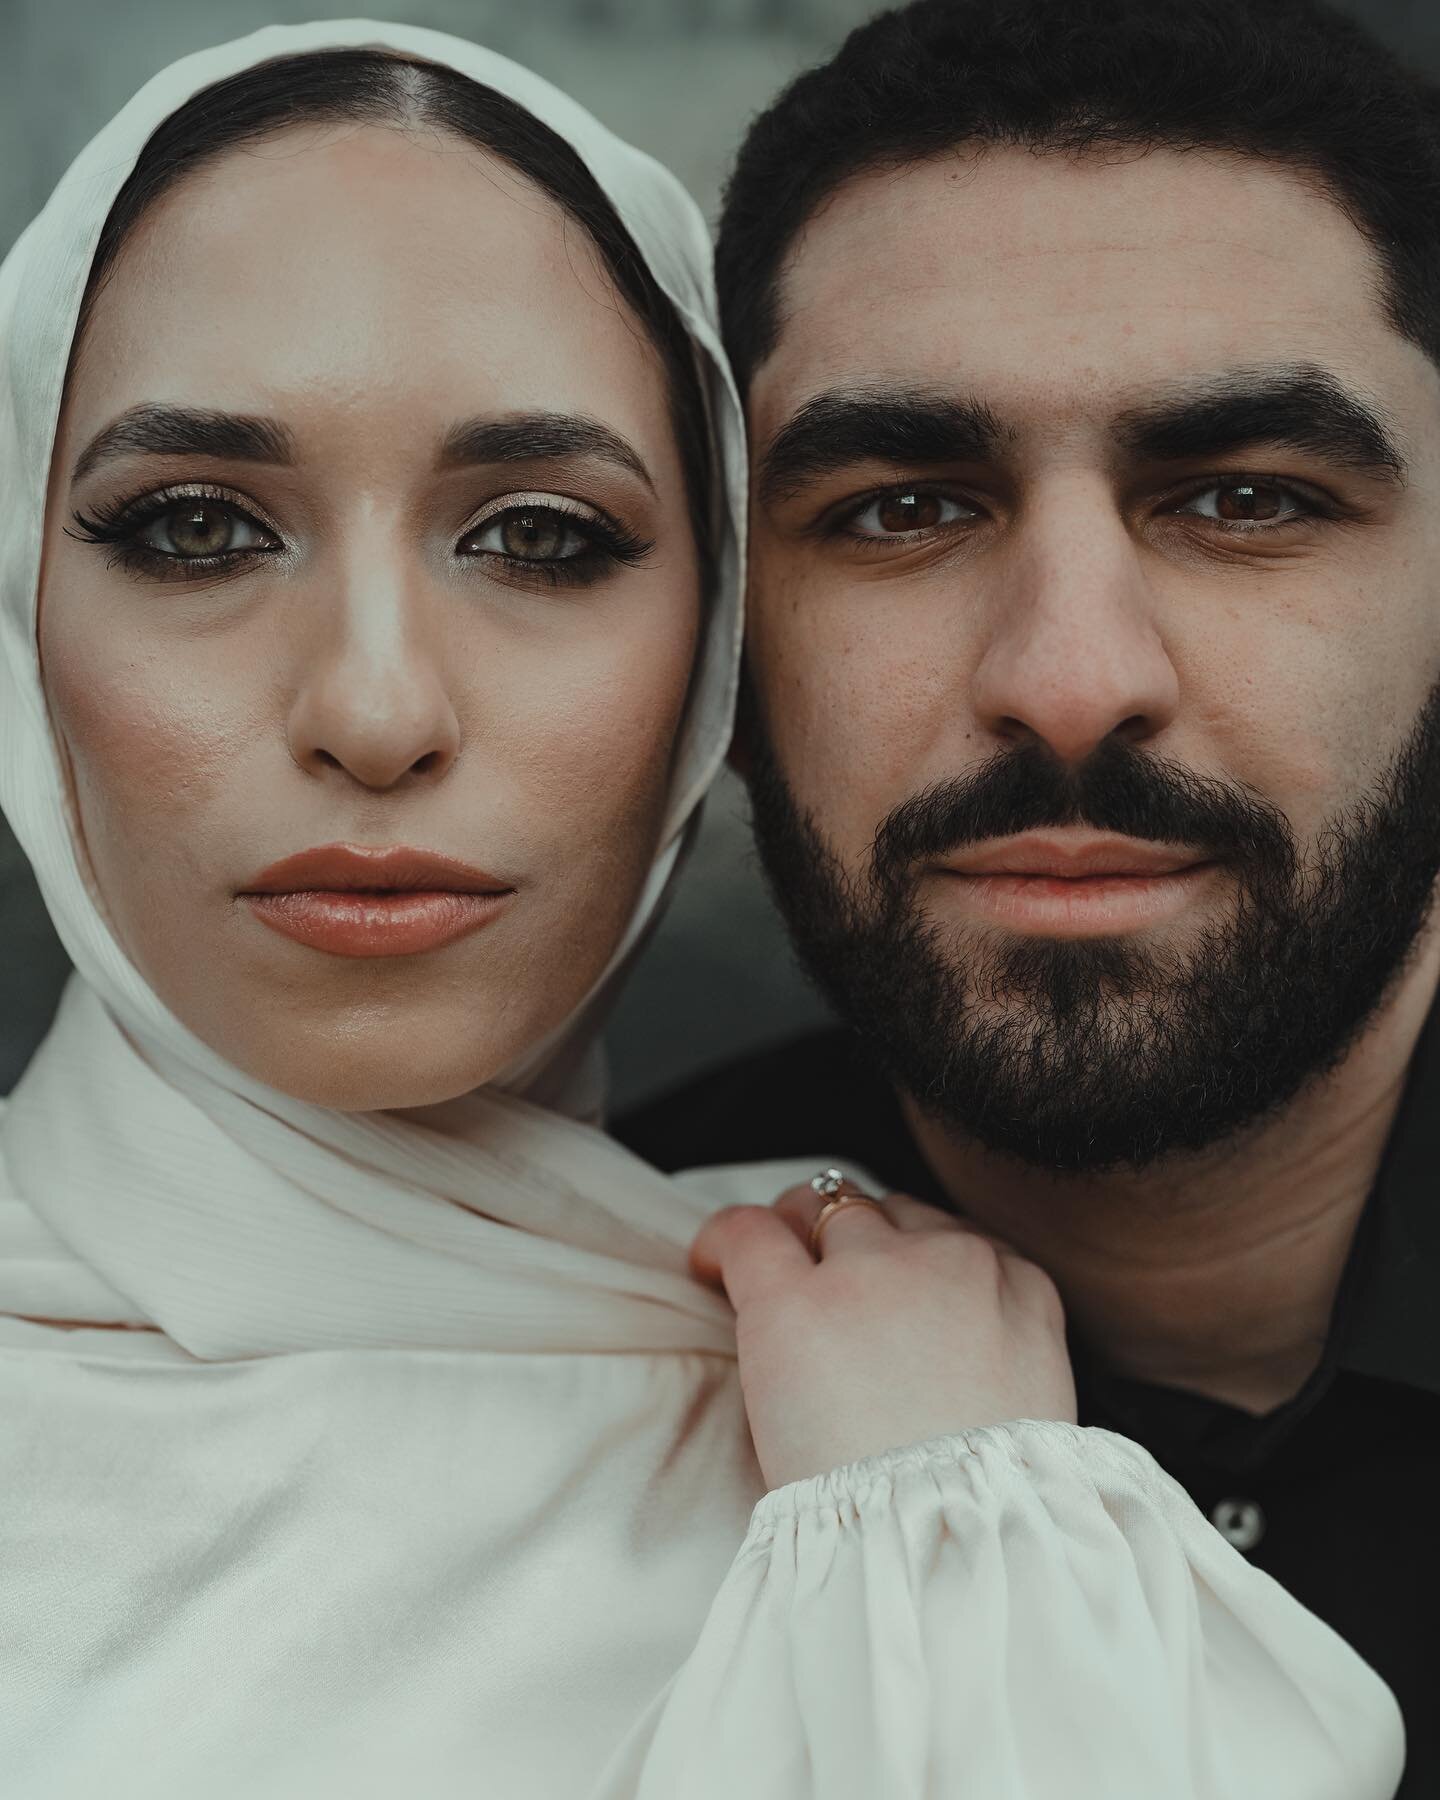 Choose You Twice 🎧 Ben Zaidi // Two years later in a different city &amp; chapter of life, these two still can&rsquo;t make love look like anything less than the epitome of photogenic perfection. Still thinking about the beautiful energy &amp; catch